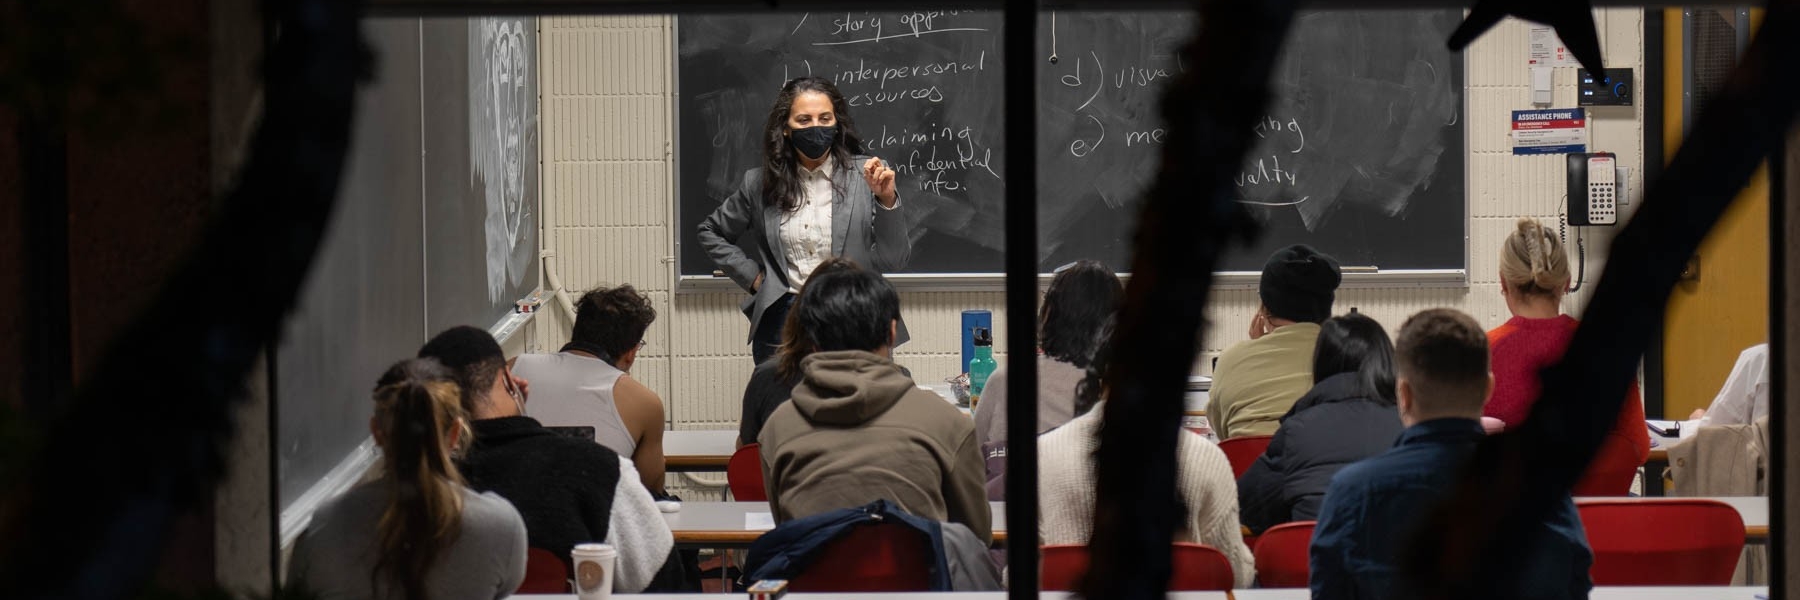 teacher stands in front of a blackboard lecturing to a room full of students